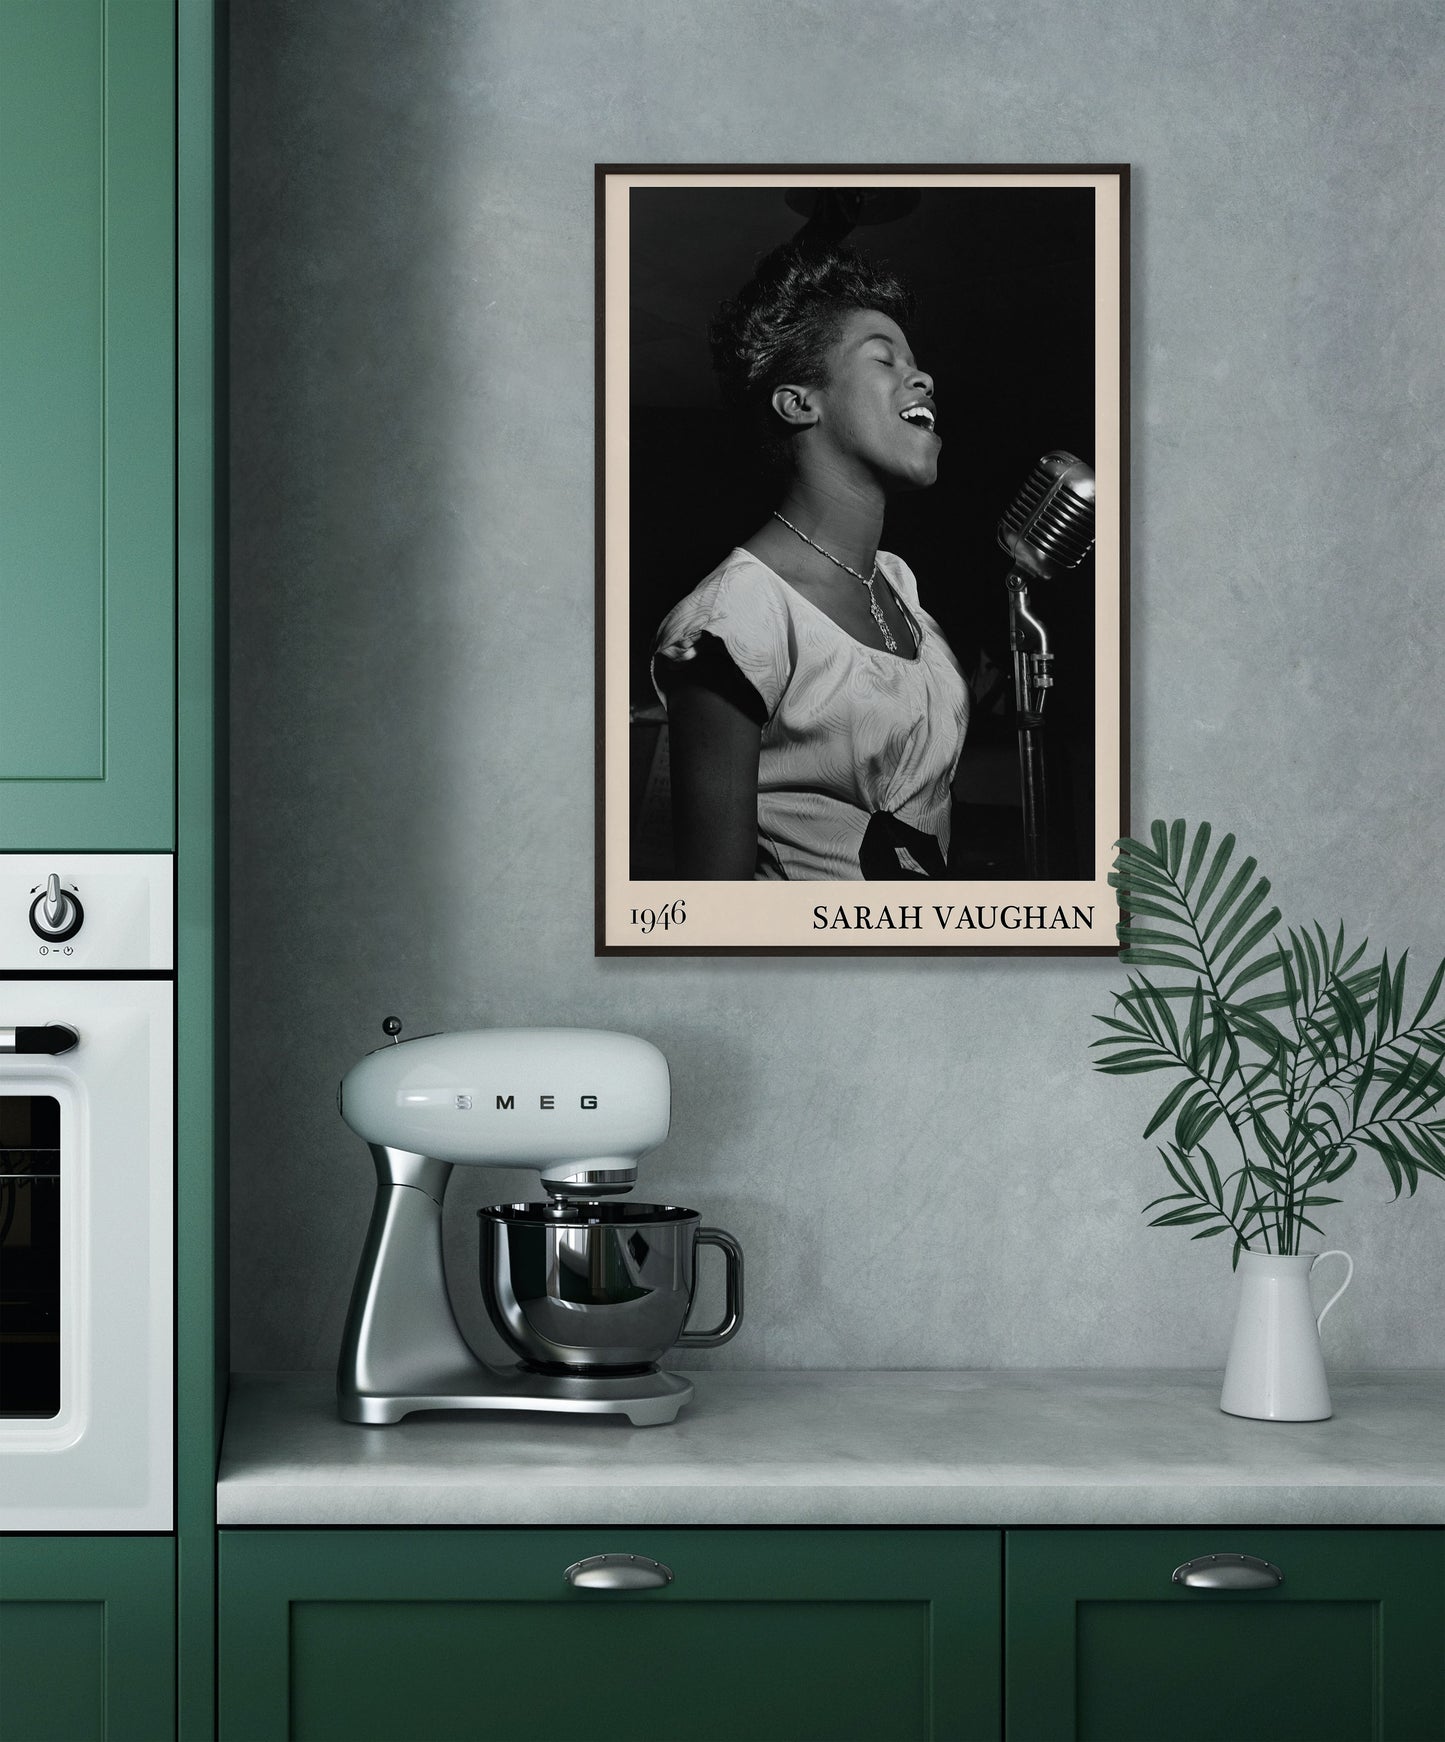 1946 photograph of Sarah Vaughan crafted into a vintage black framed jazz poster. The poster is hanging on a grey kitchen wall.